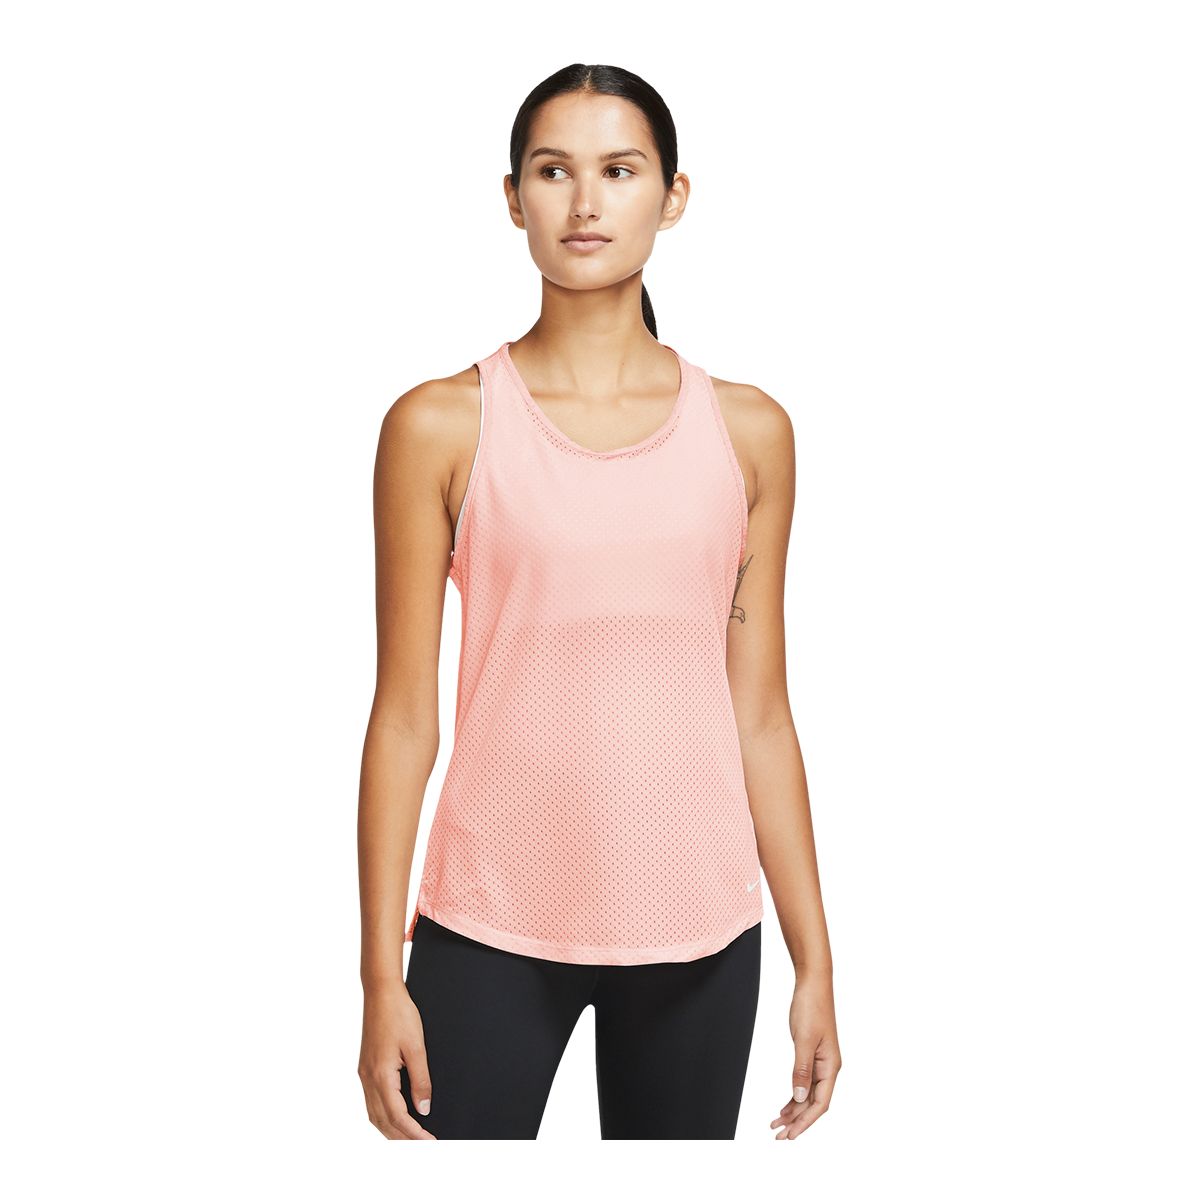 Nike Women's Run One Breathe Tank Top, Relaxed Fit, Sleeveless